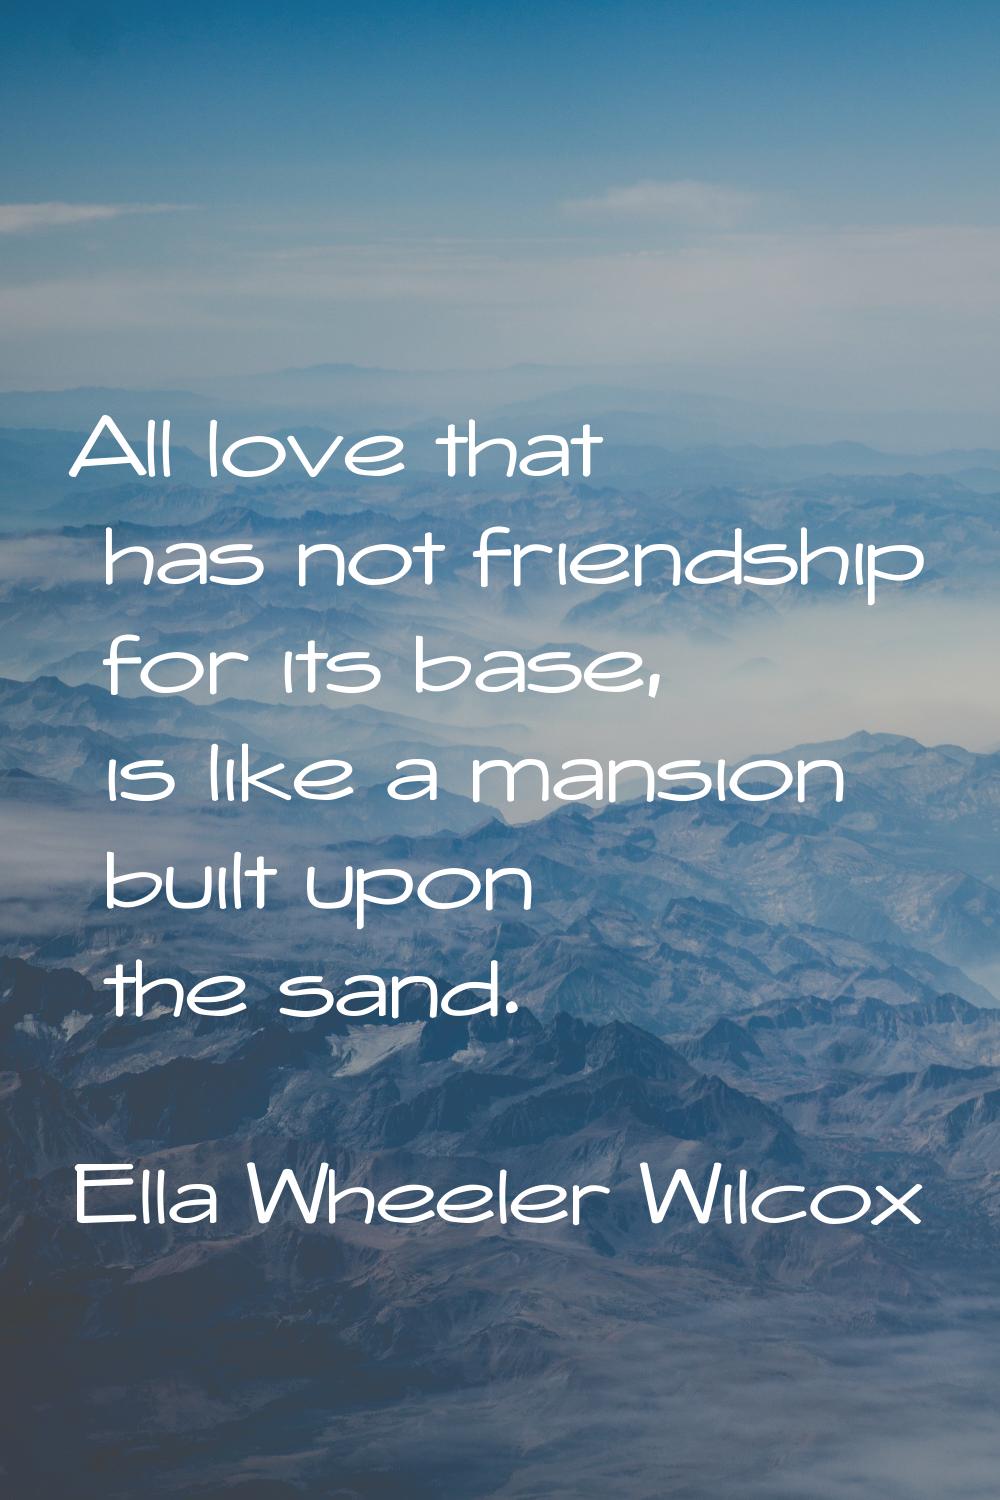 All love that has not friendship for its base, is like a mansion built upon the sand.